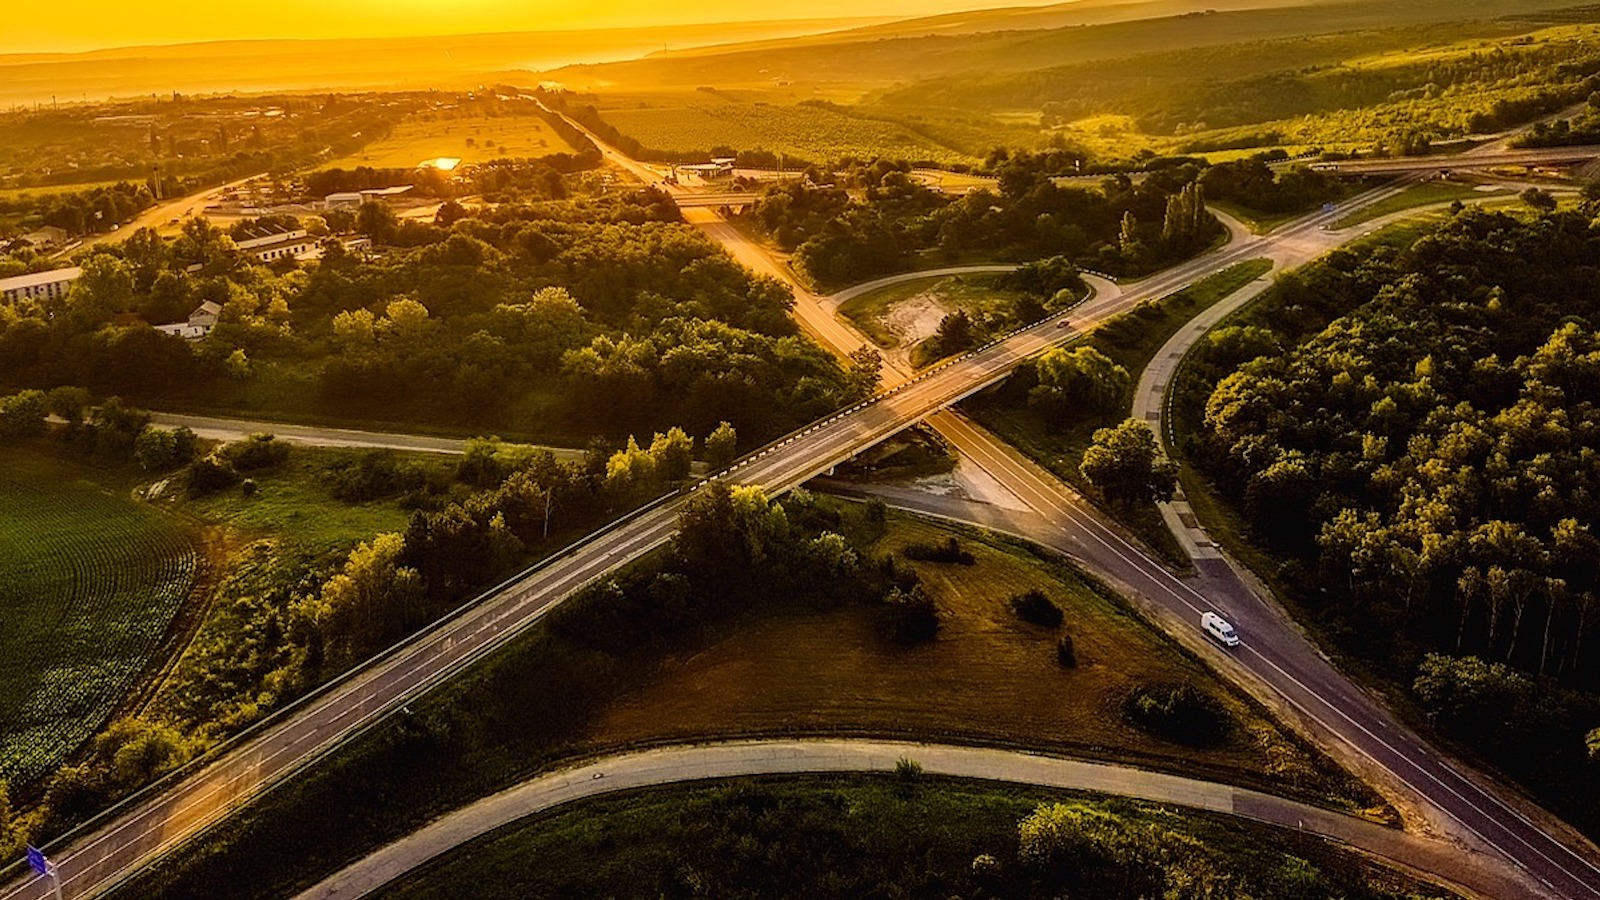 Overhead view of a freeway with on-ramps at sunset